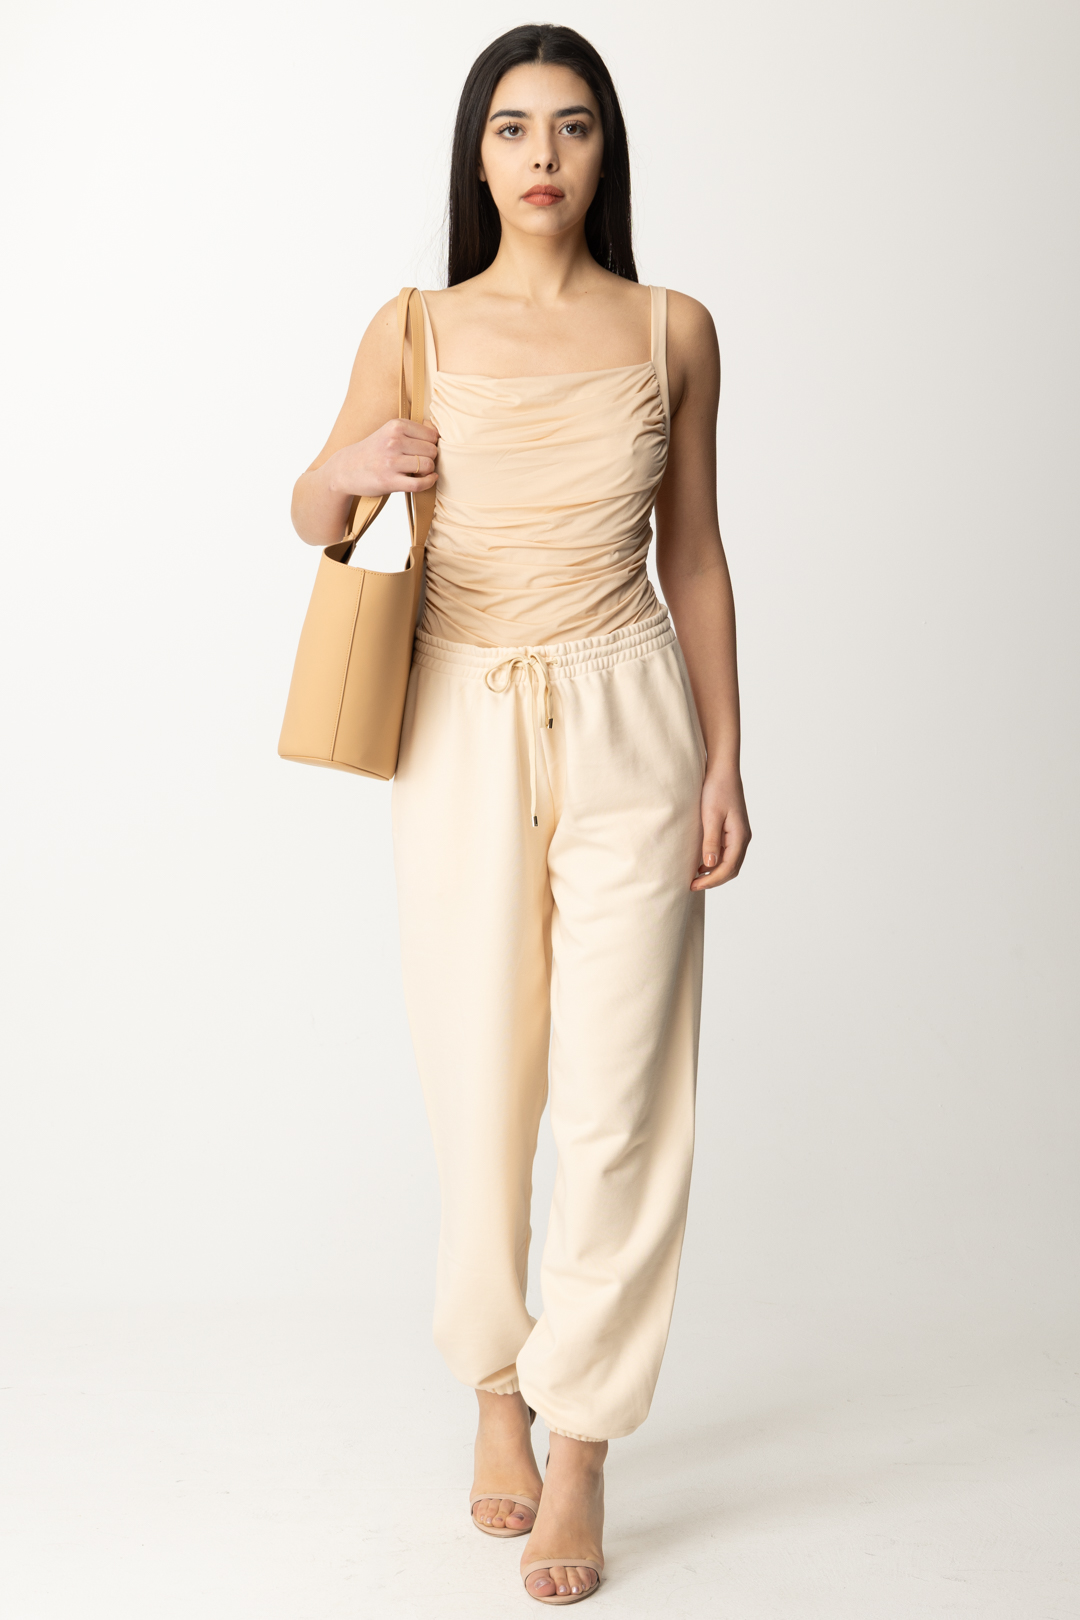 Preview: Patrizia Pepe Draped bodysuit with straps Biscuit Beige